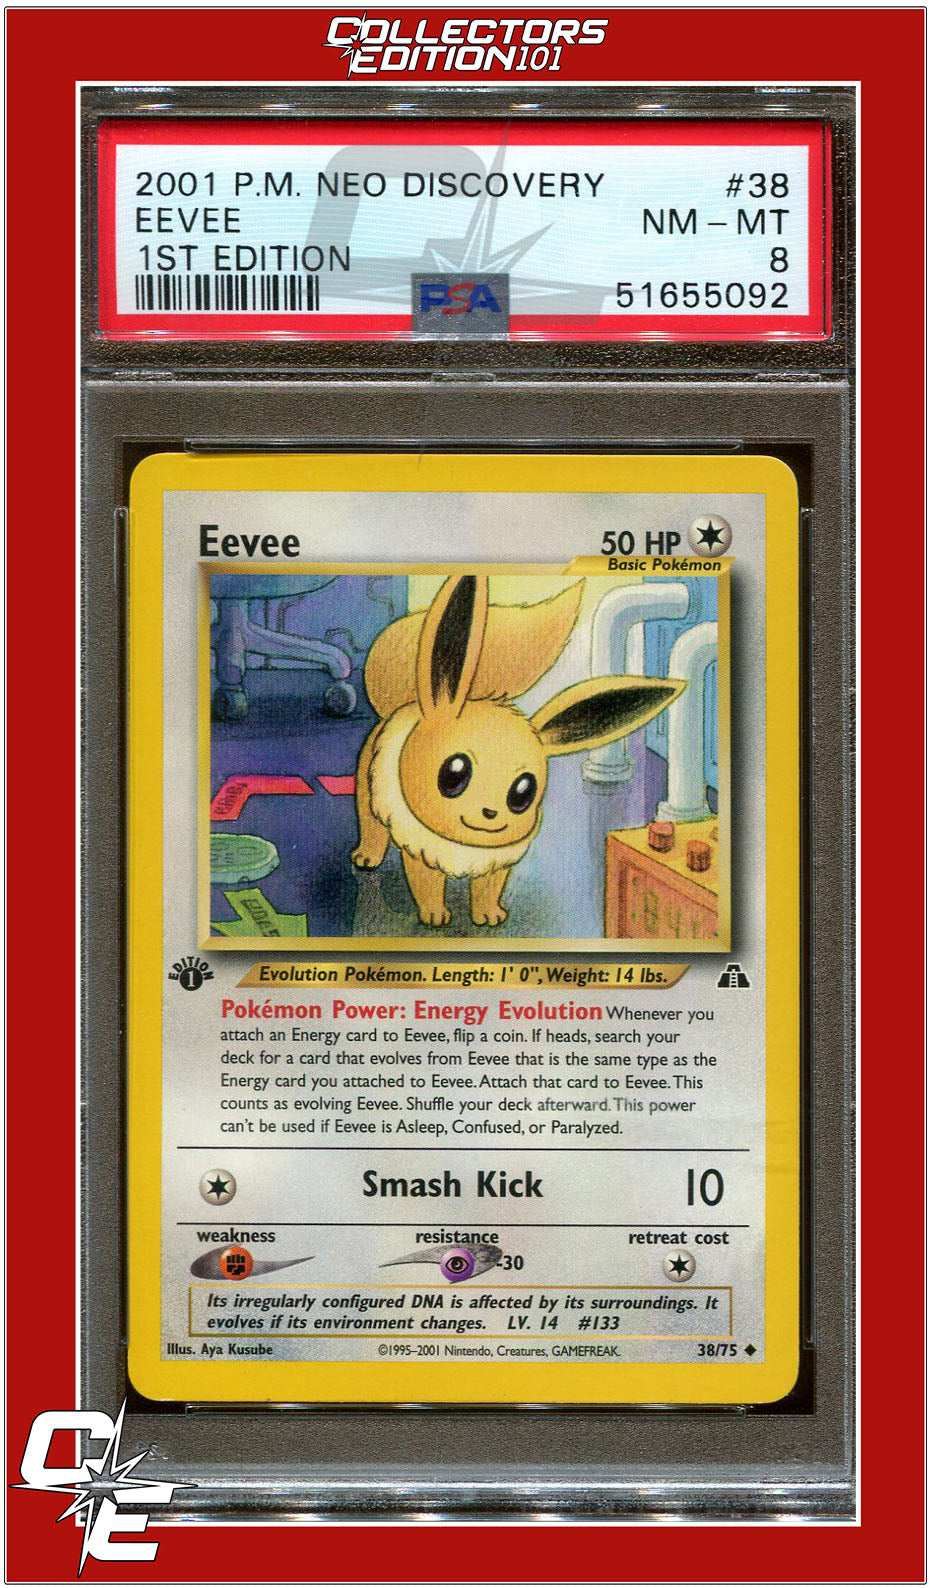 Neo Discovery 38 Eevee 1st Edition PSA 8